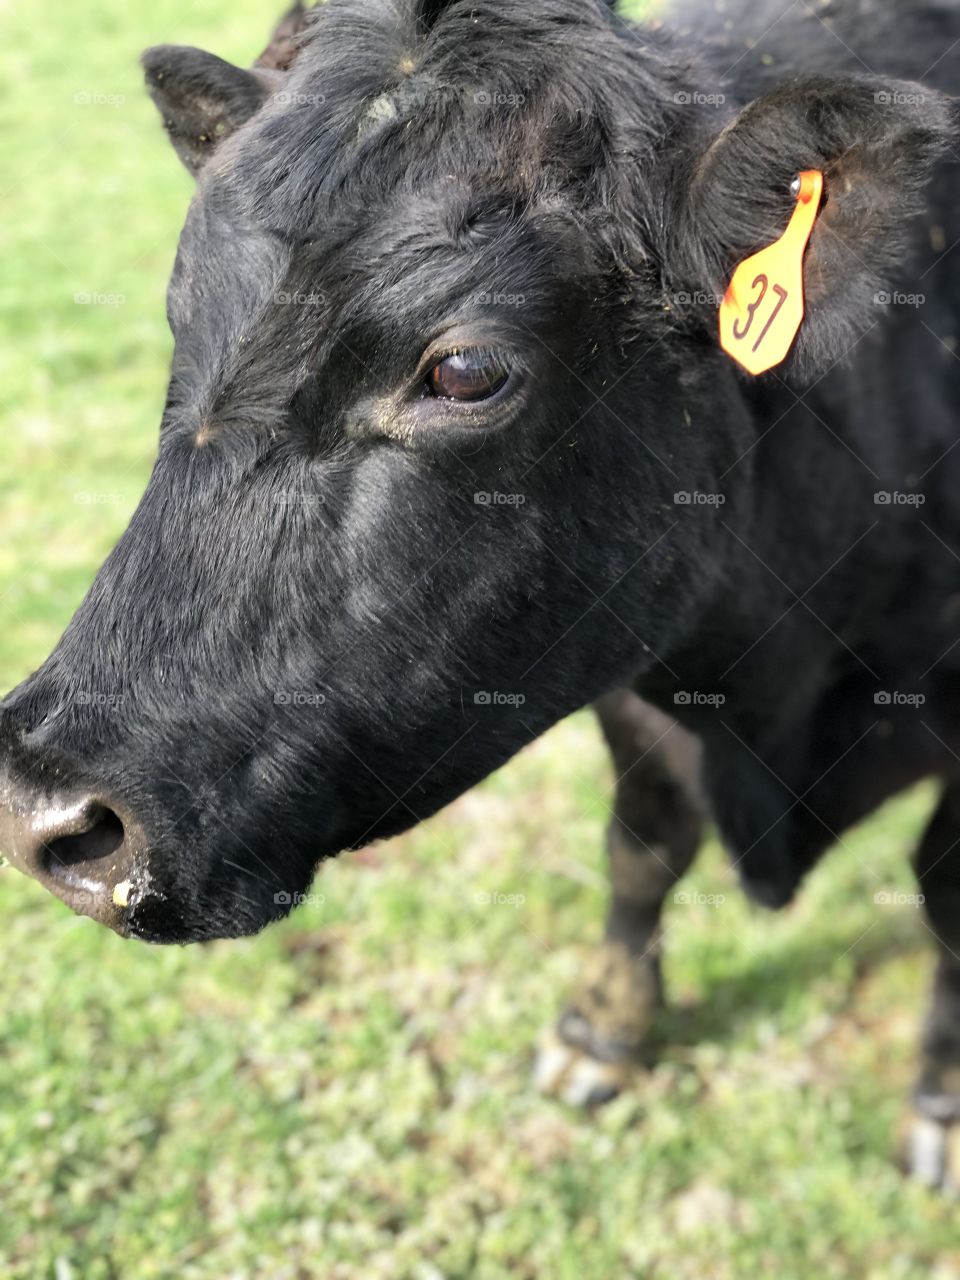 This is #37 the oldest cow on my grandparents farm. She is so friendly and will allow anyone to pet her.